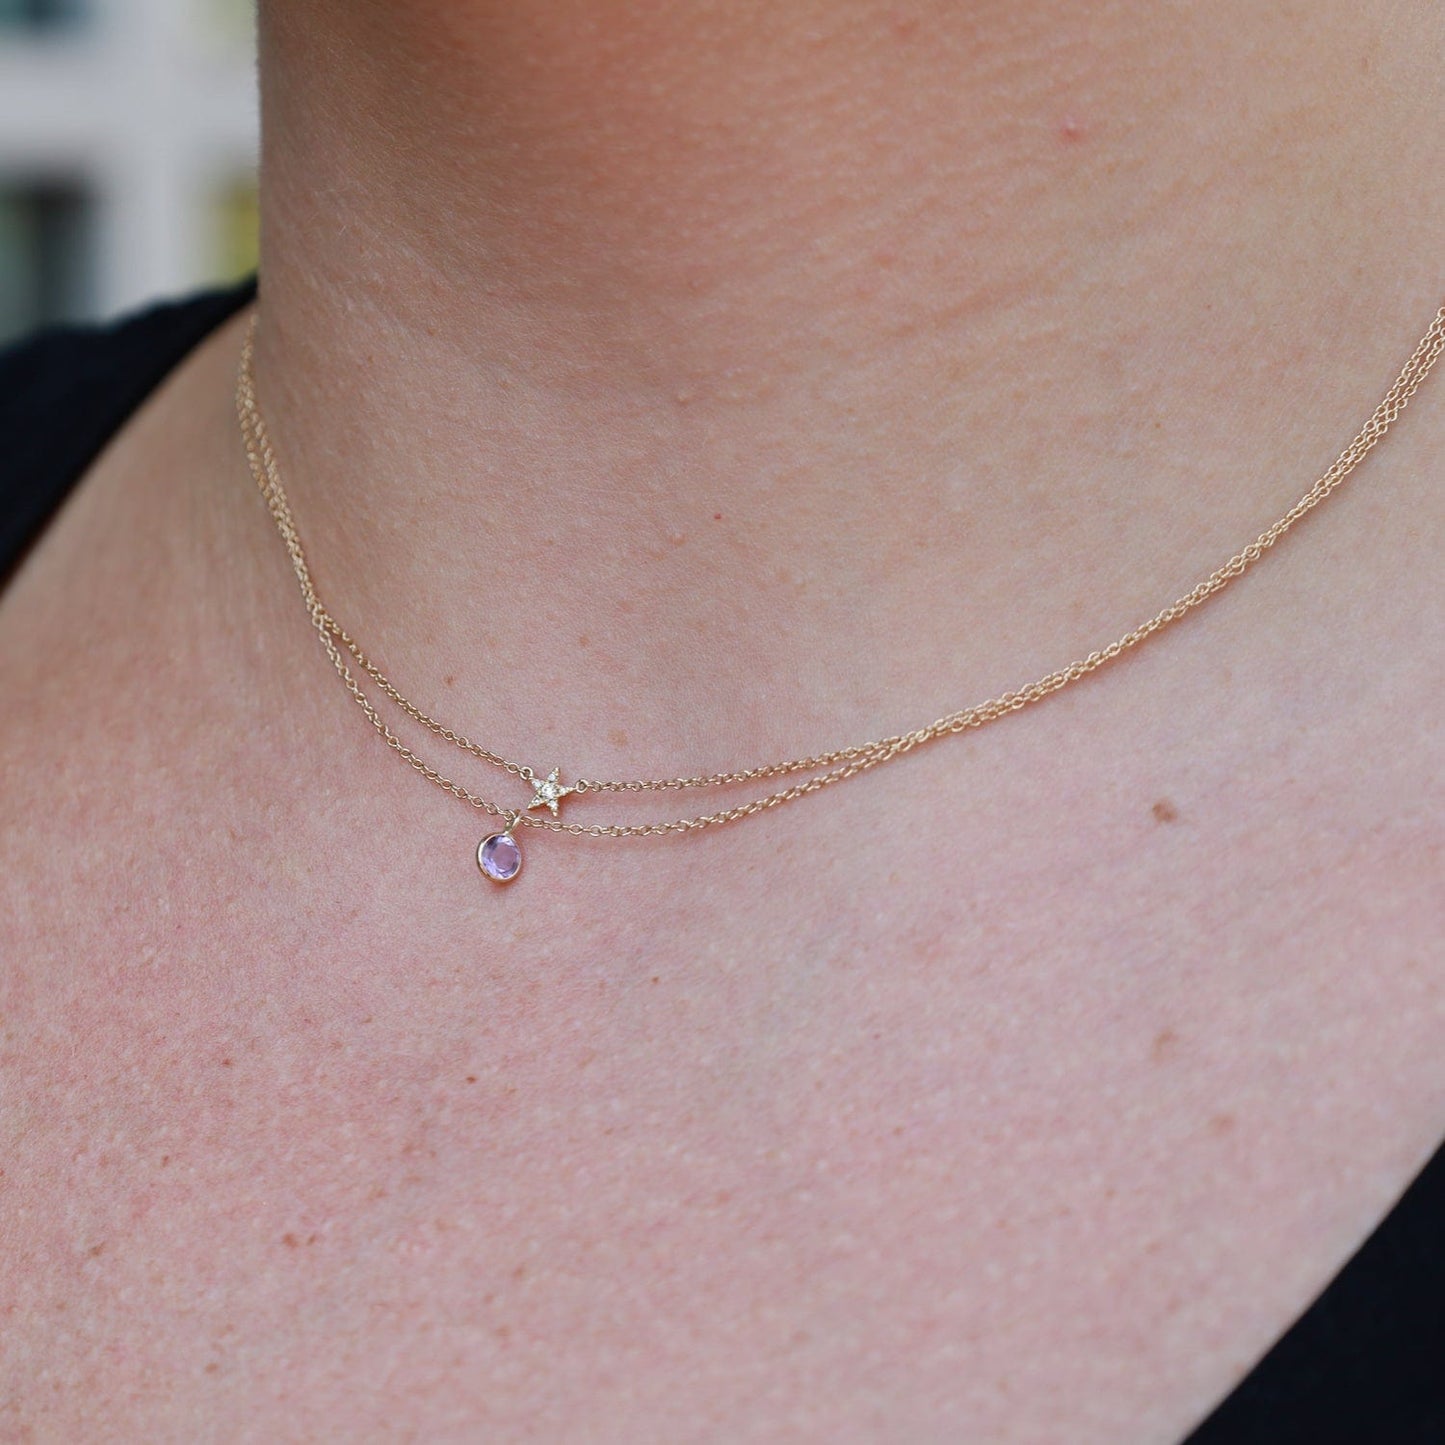 NKL-14K Yellow Gold & Pink Amethyst Solitaire Necklace